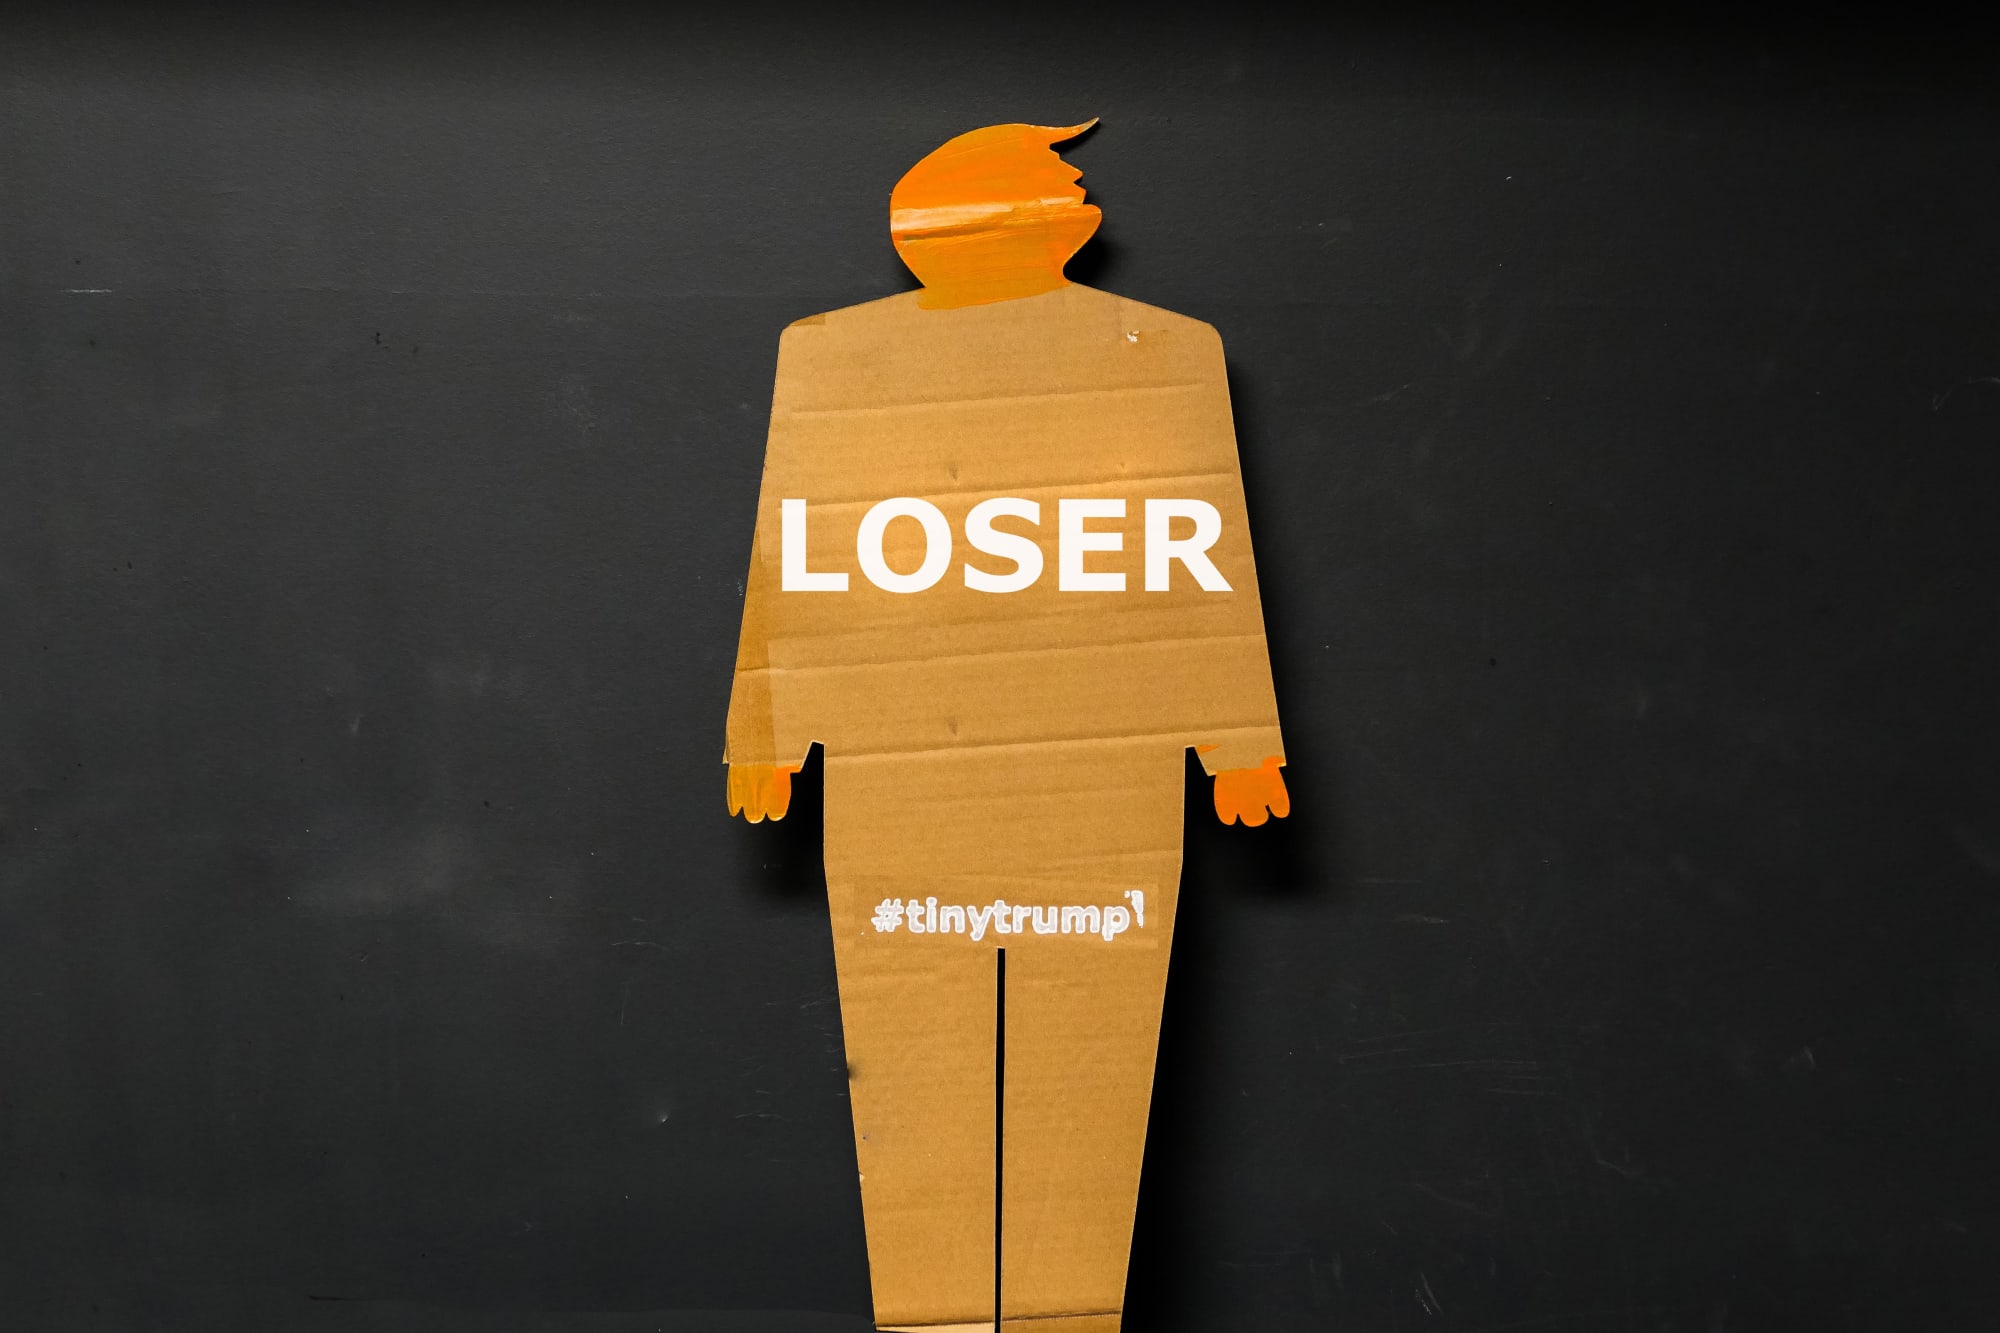 Small thumbnail image of Same as previous image except the slogan is Loser.